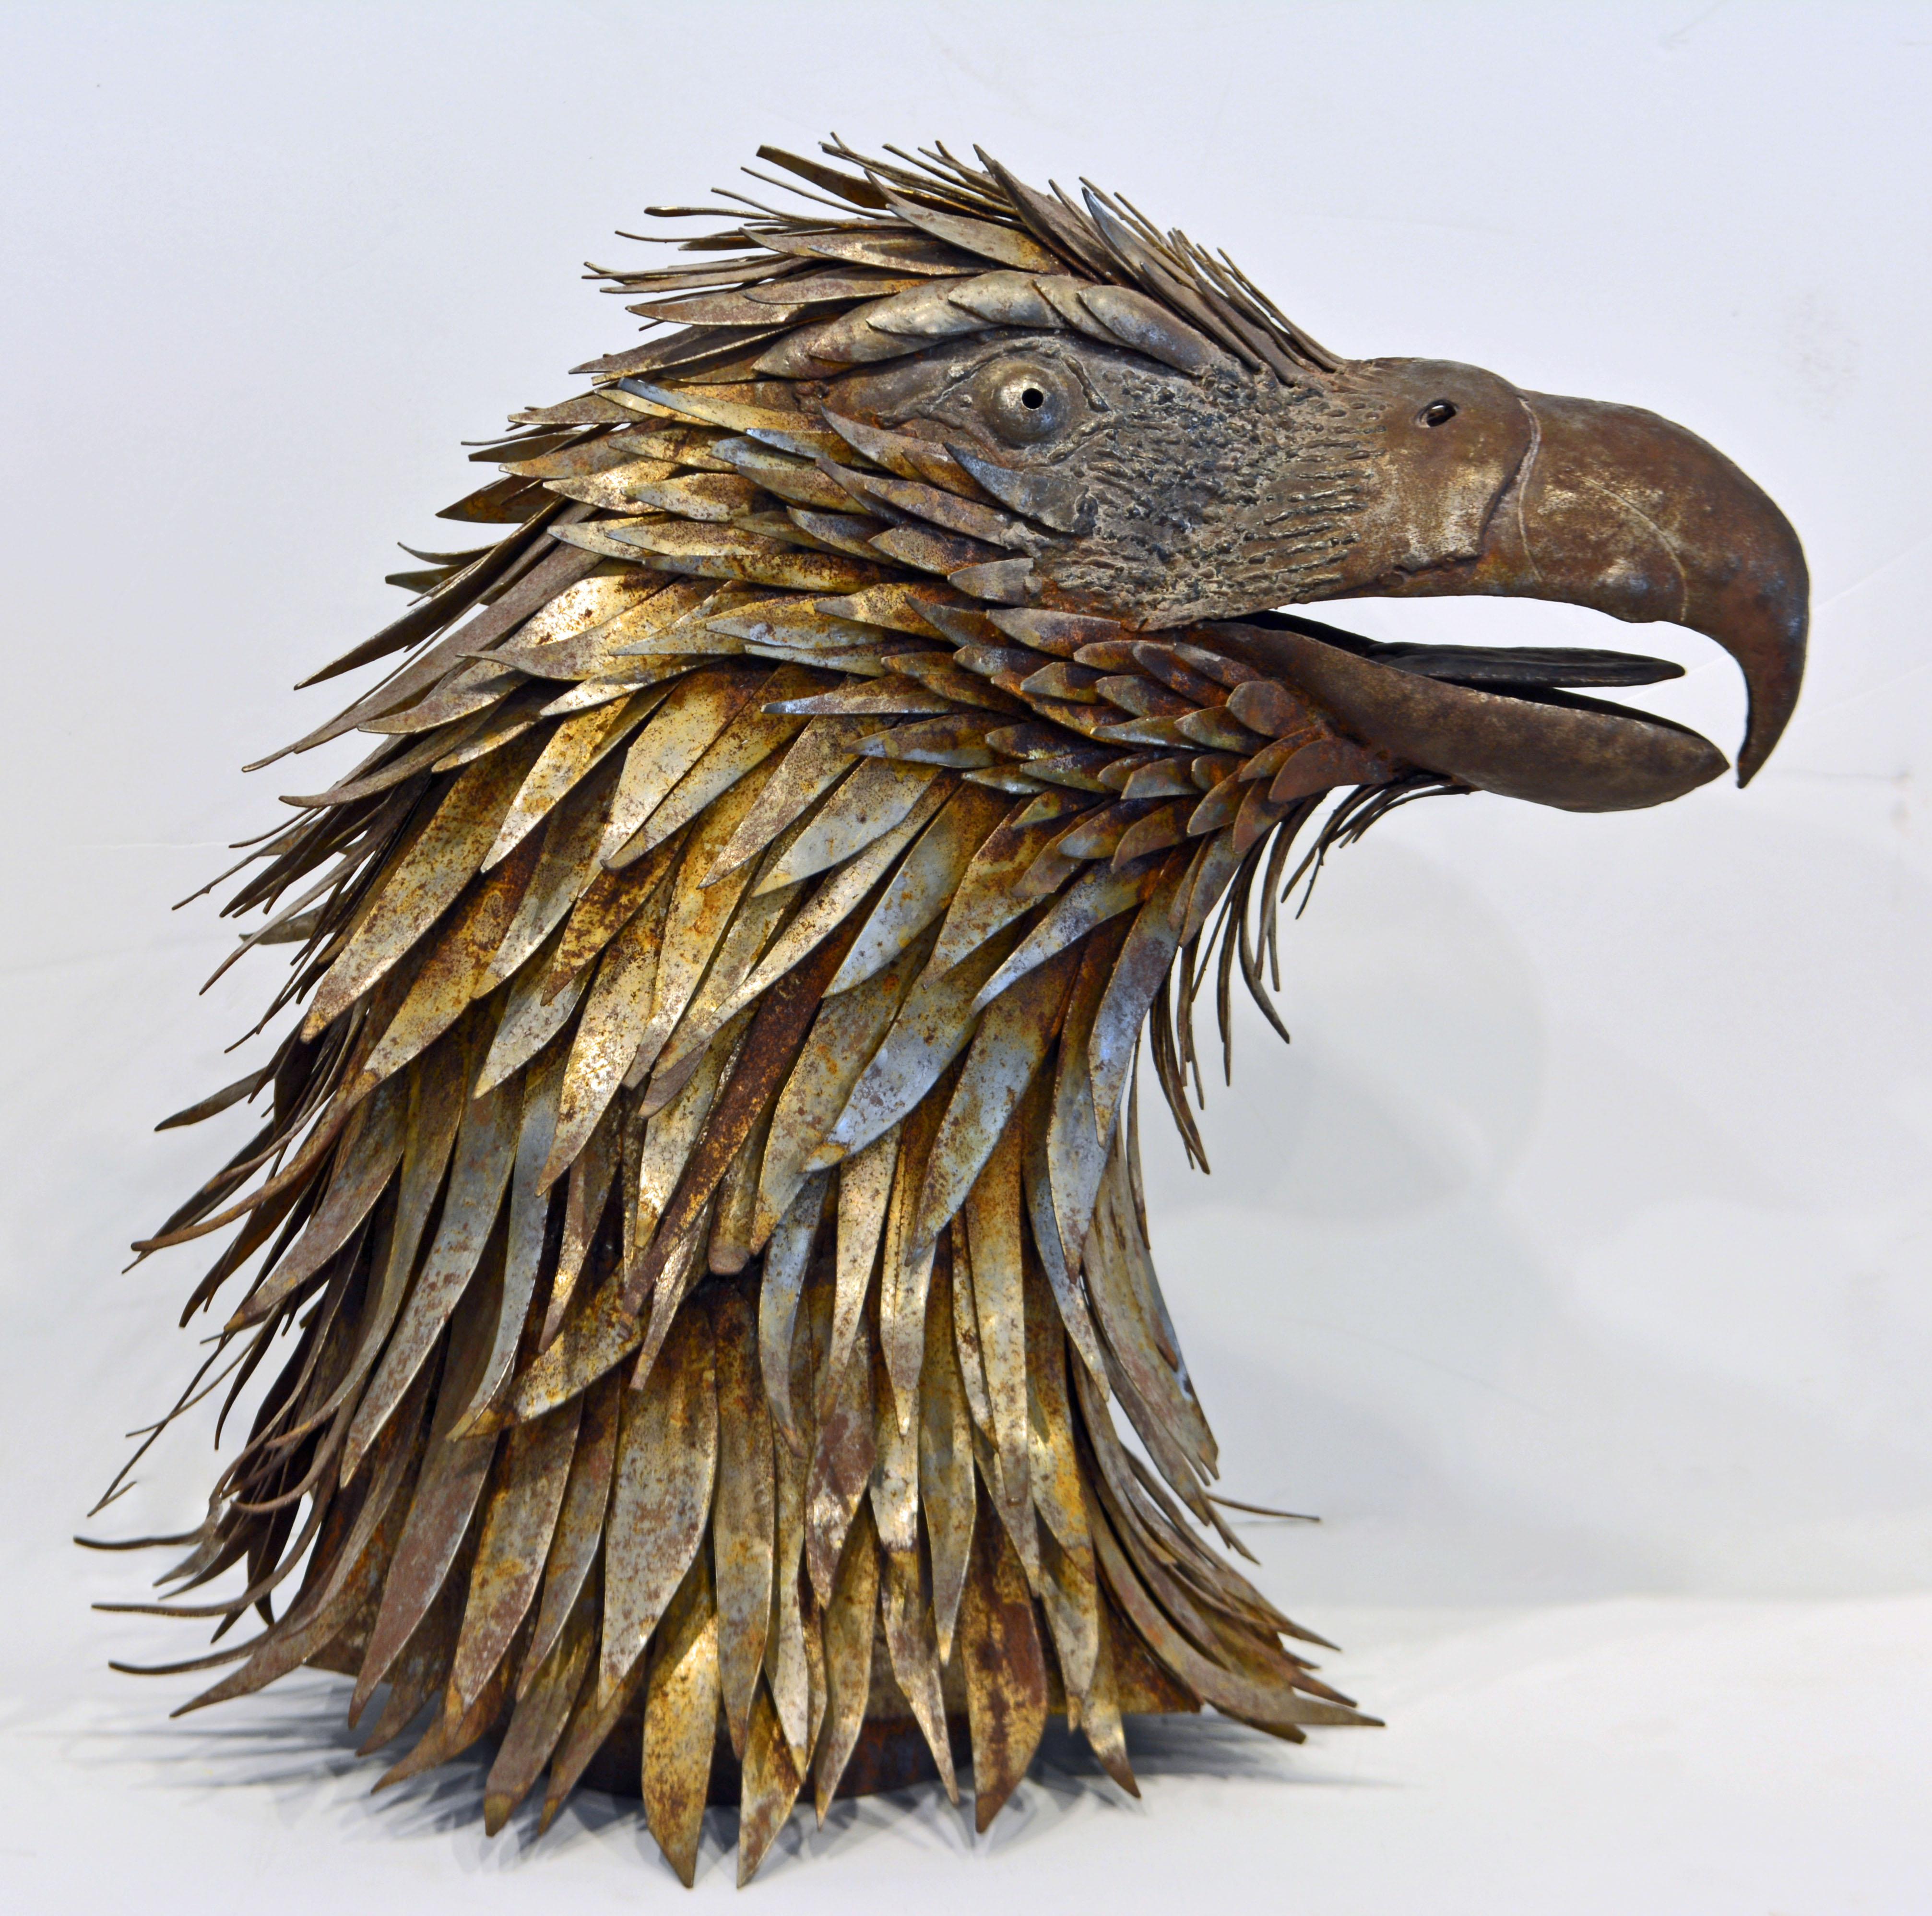 This evocative iron sculpture of an eagle's head with finely modulated beak and eyes is strikingly artistic. The feathers are made of thin metal and organized in ever changing directions. The style and the somber impression is not unlike of that of